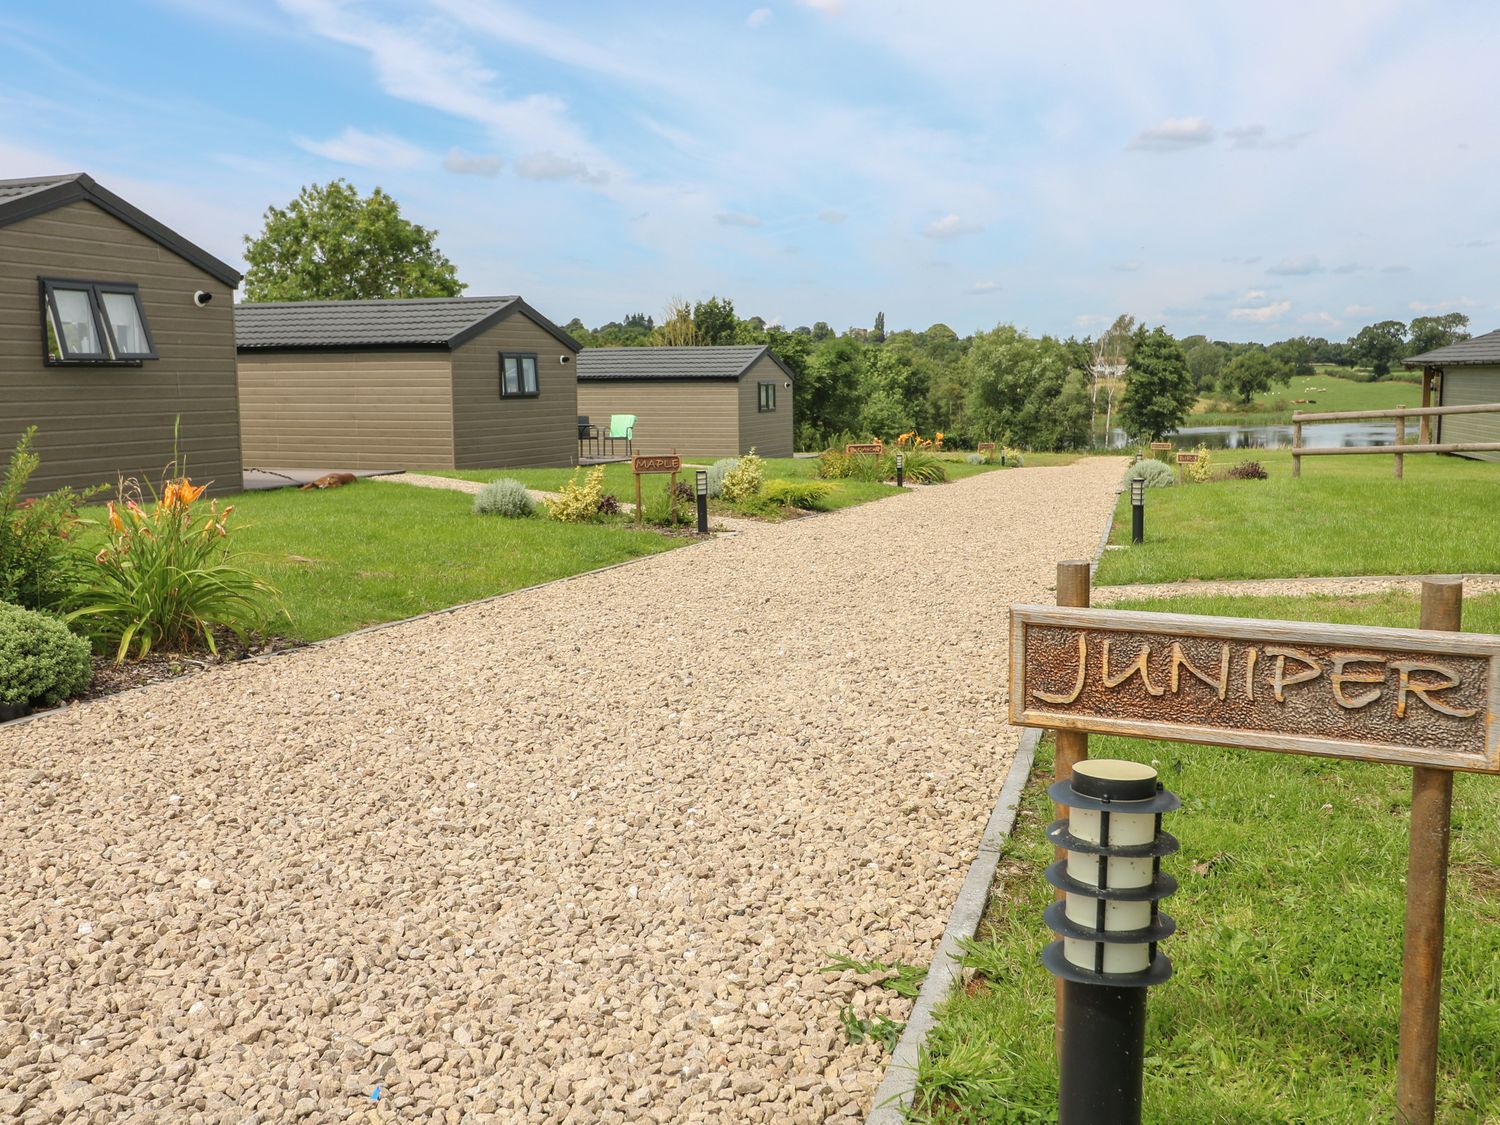 Juniper, Donisthorpe, Leicestershire. One-bed lodge with lakeside views. Ideal for couples. Hot tub.